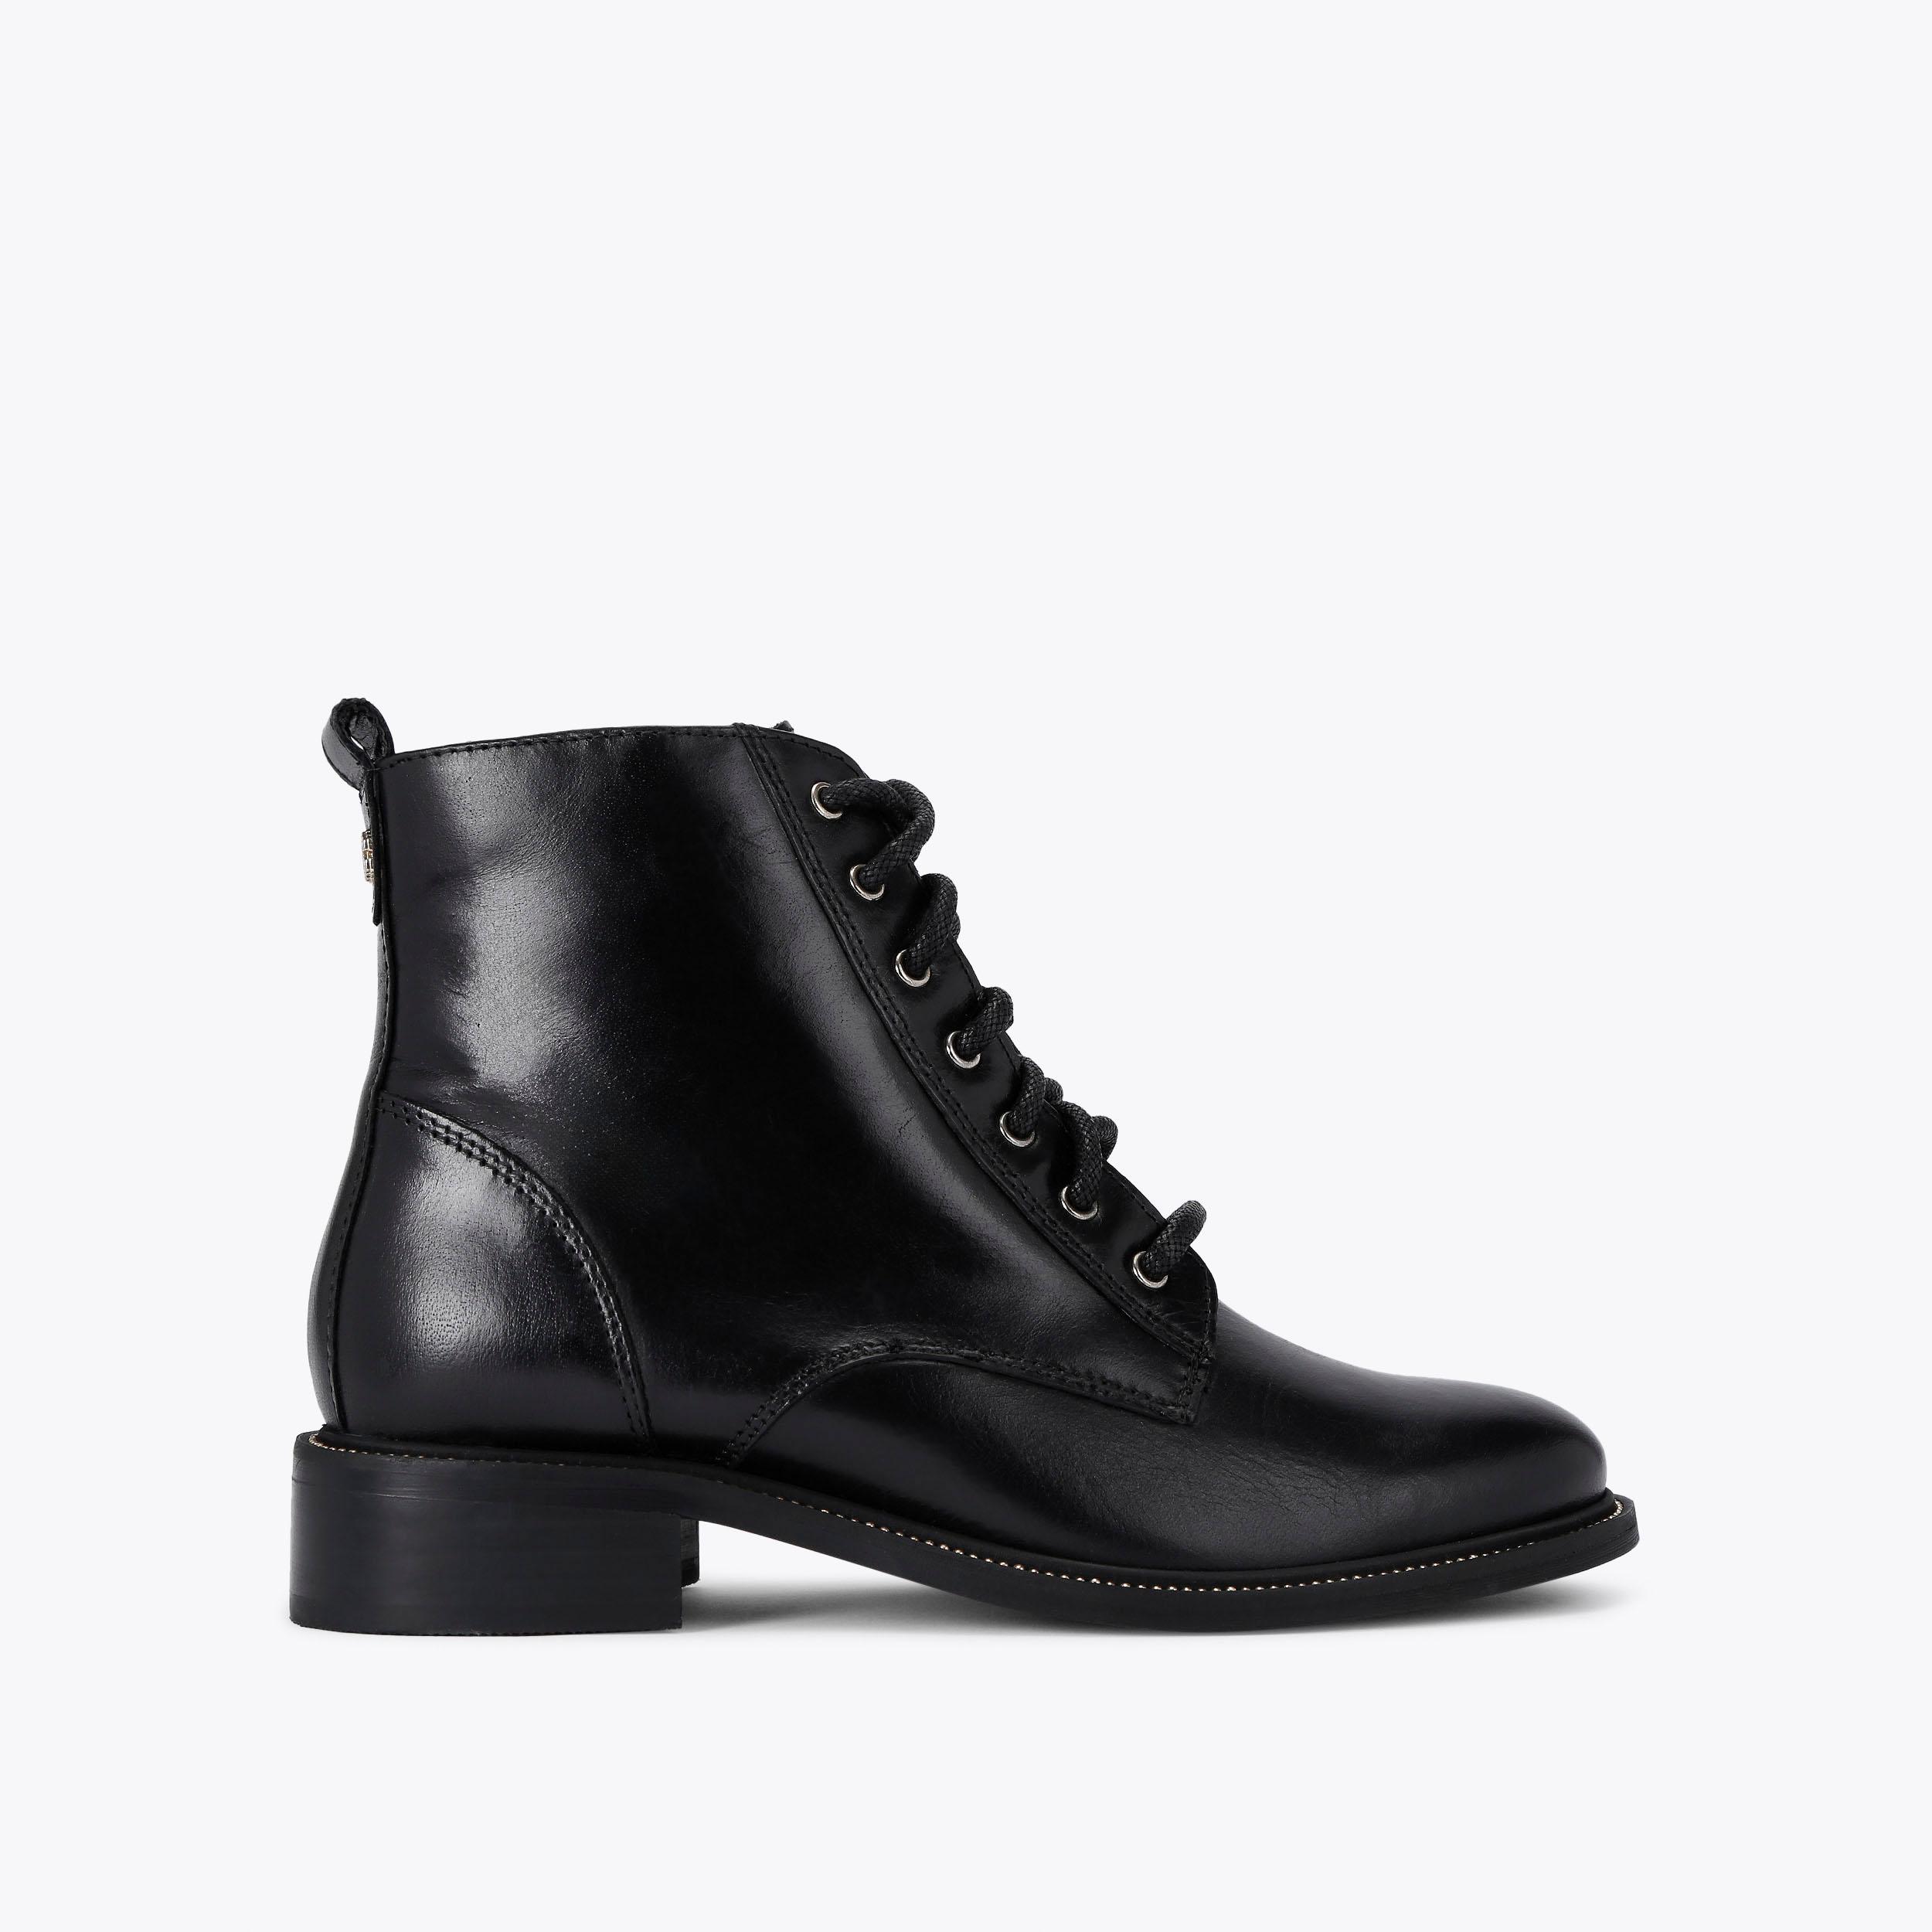 SPIKE Black Lace Up Ankle Boots by CARVELA